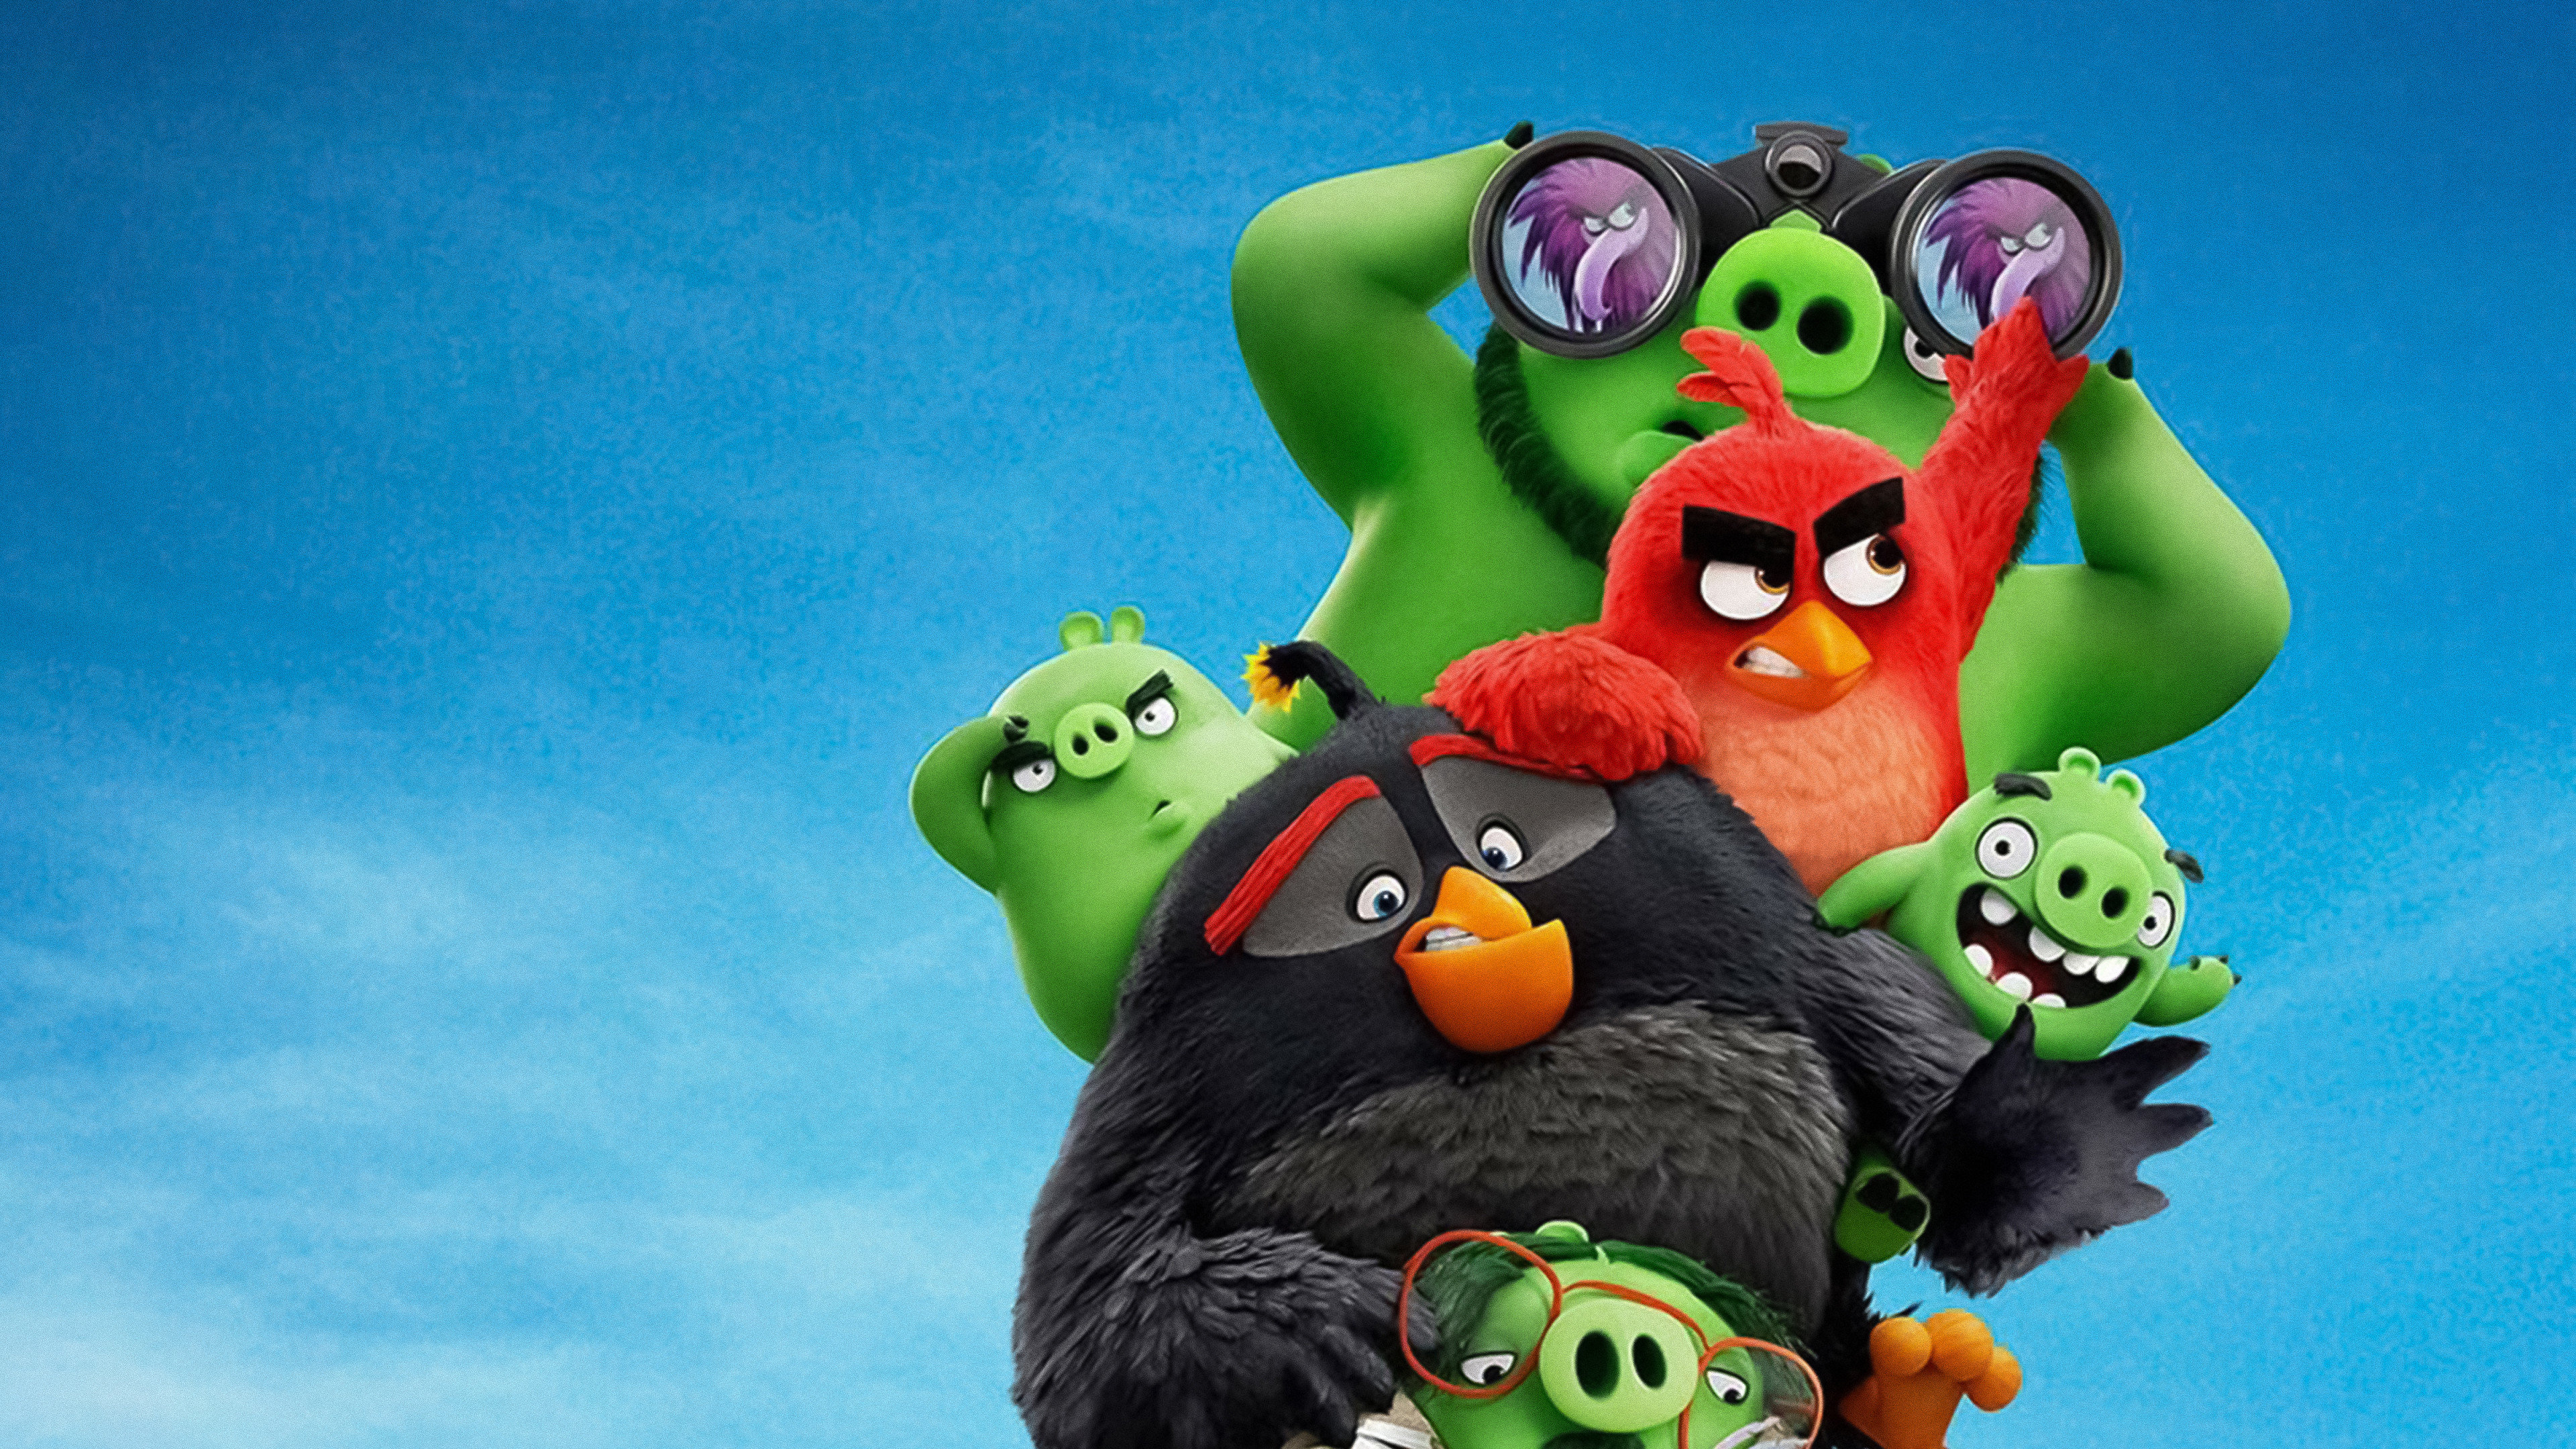 Wallpaper The Angry Birds Movie 2, poster, 4K, Movies #21807